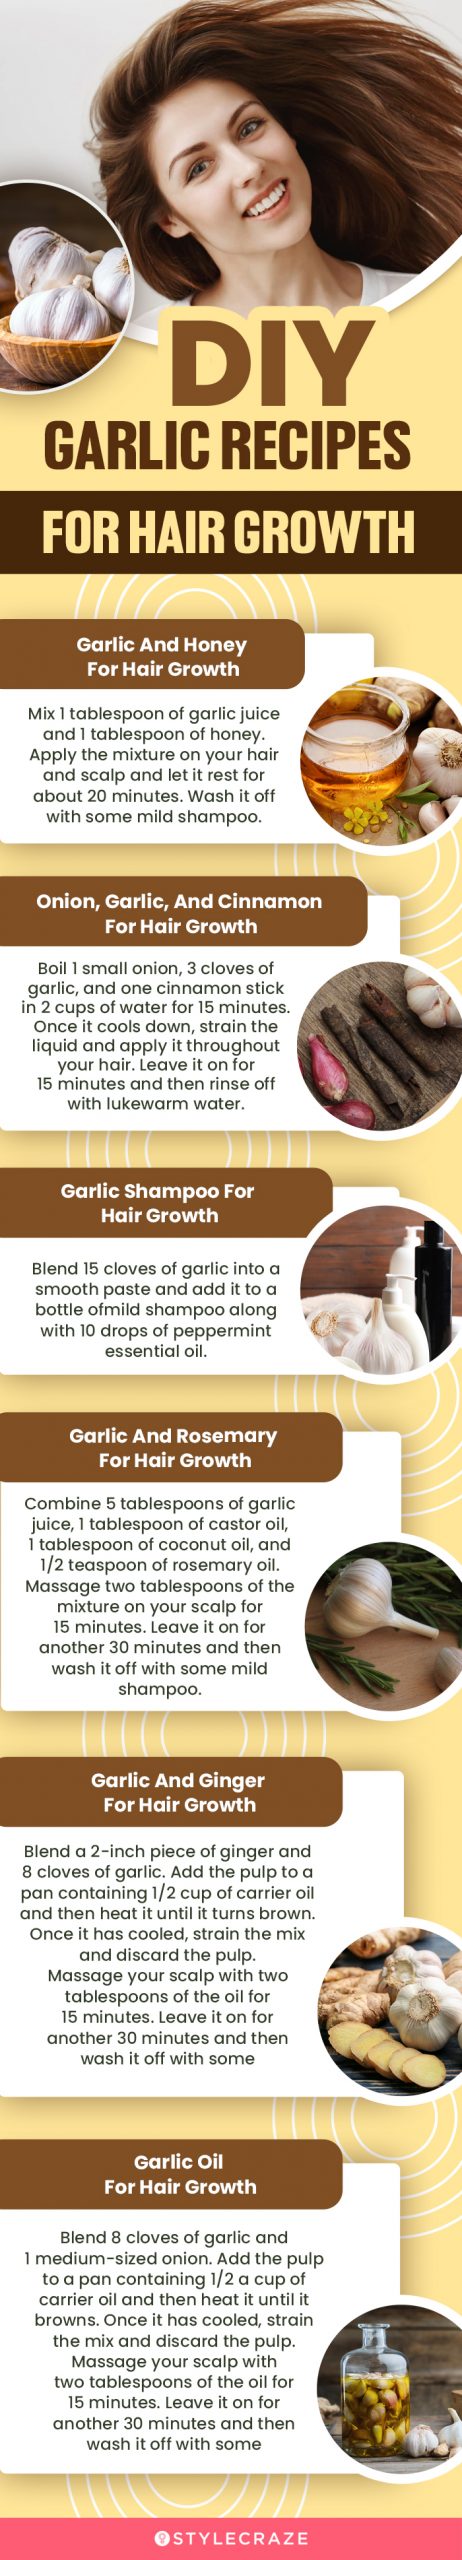 diy garlic recipes for hair growth (infographic)